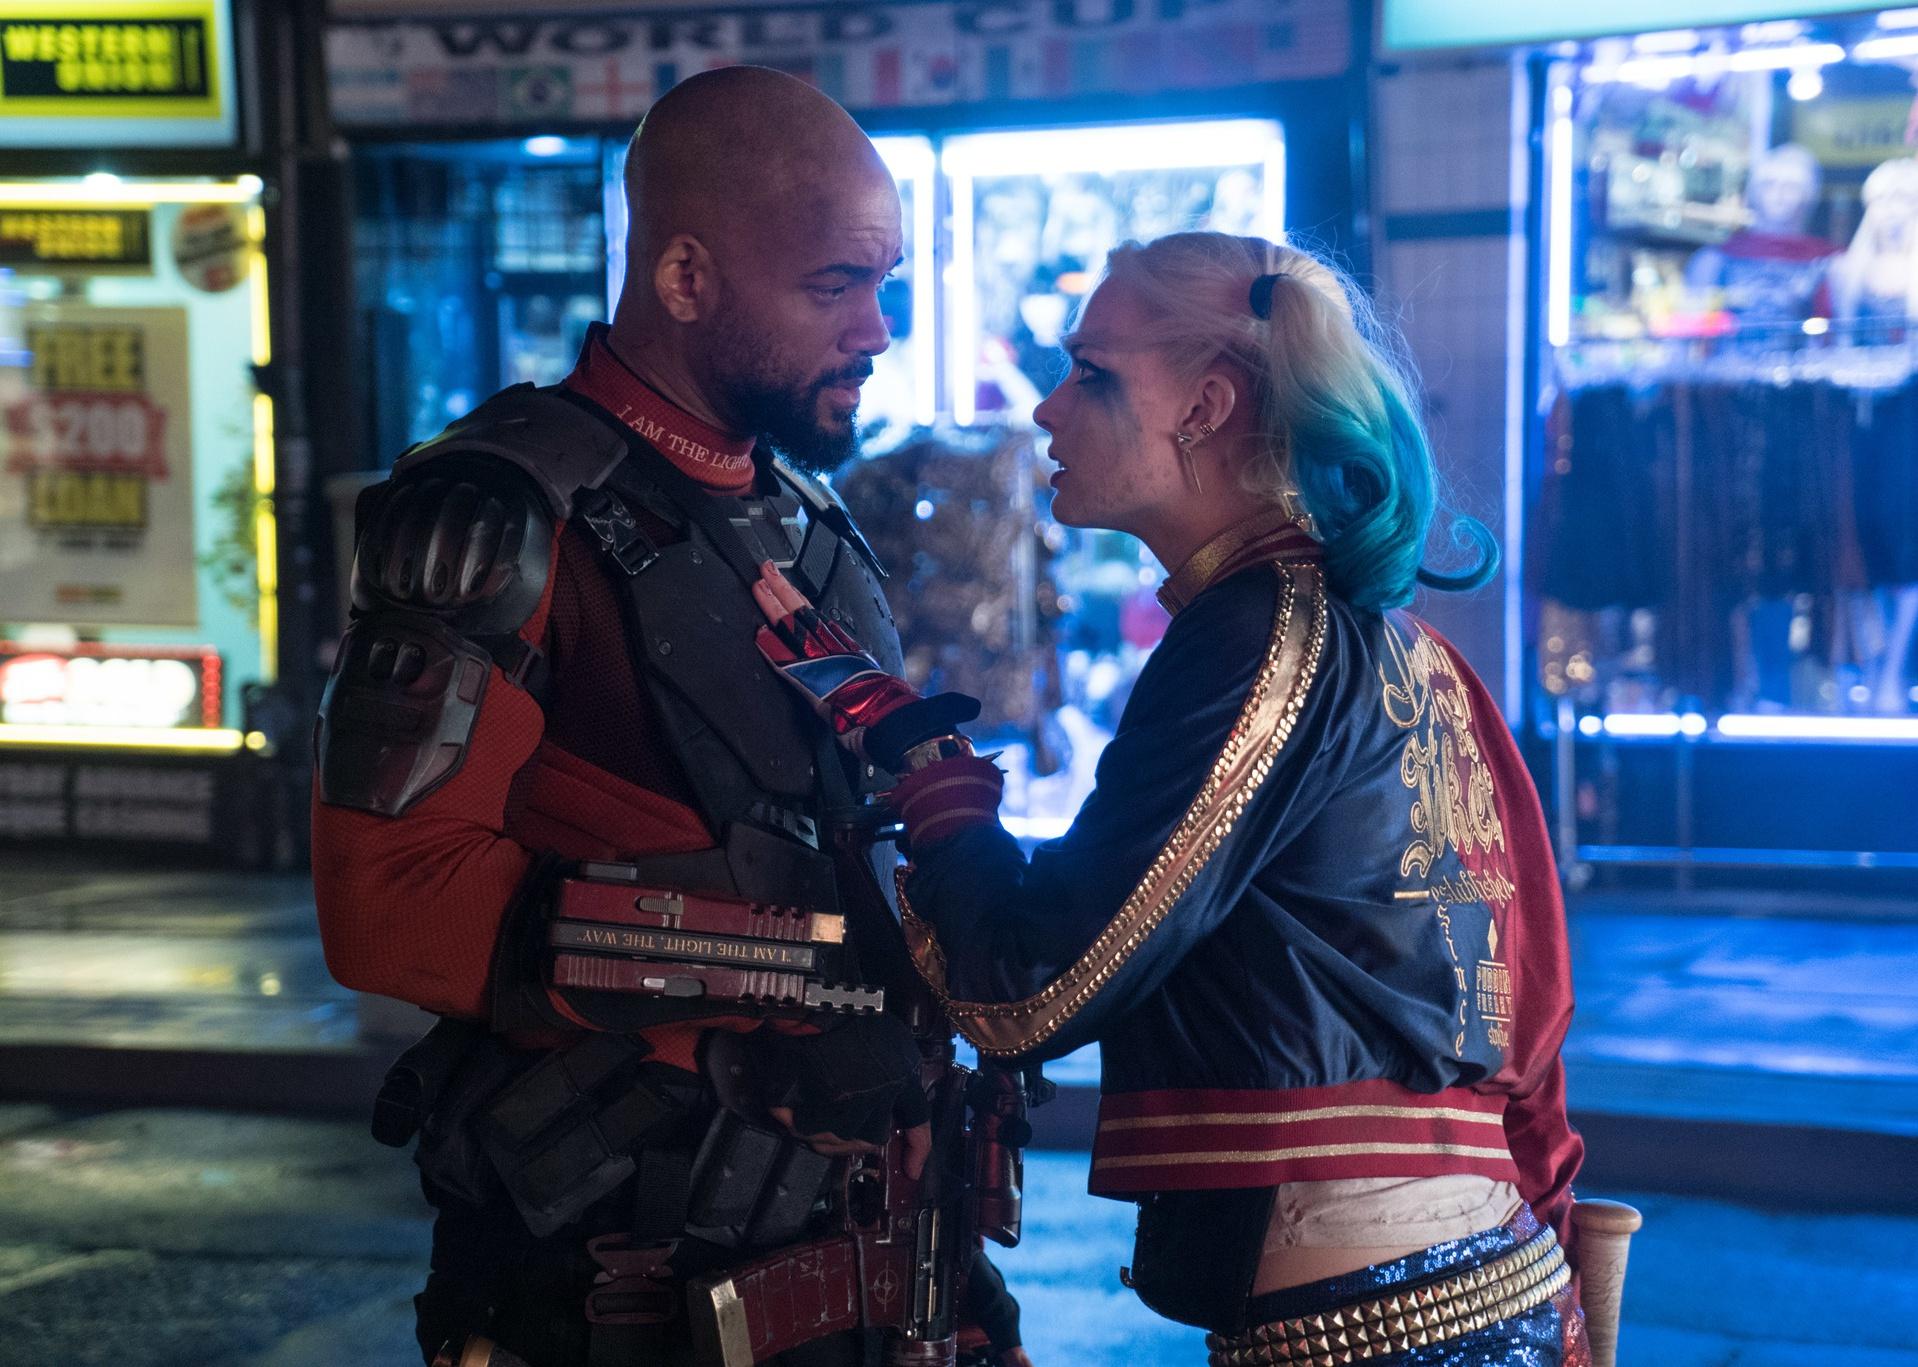 Will Smith and Margot Robbie talking in the street.